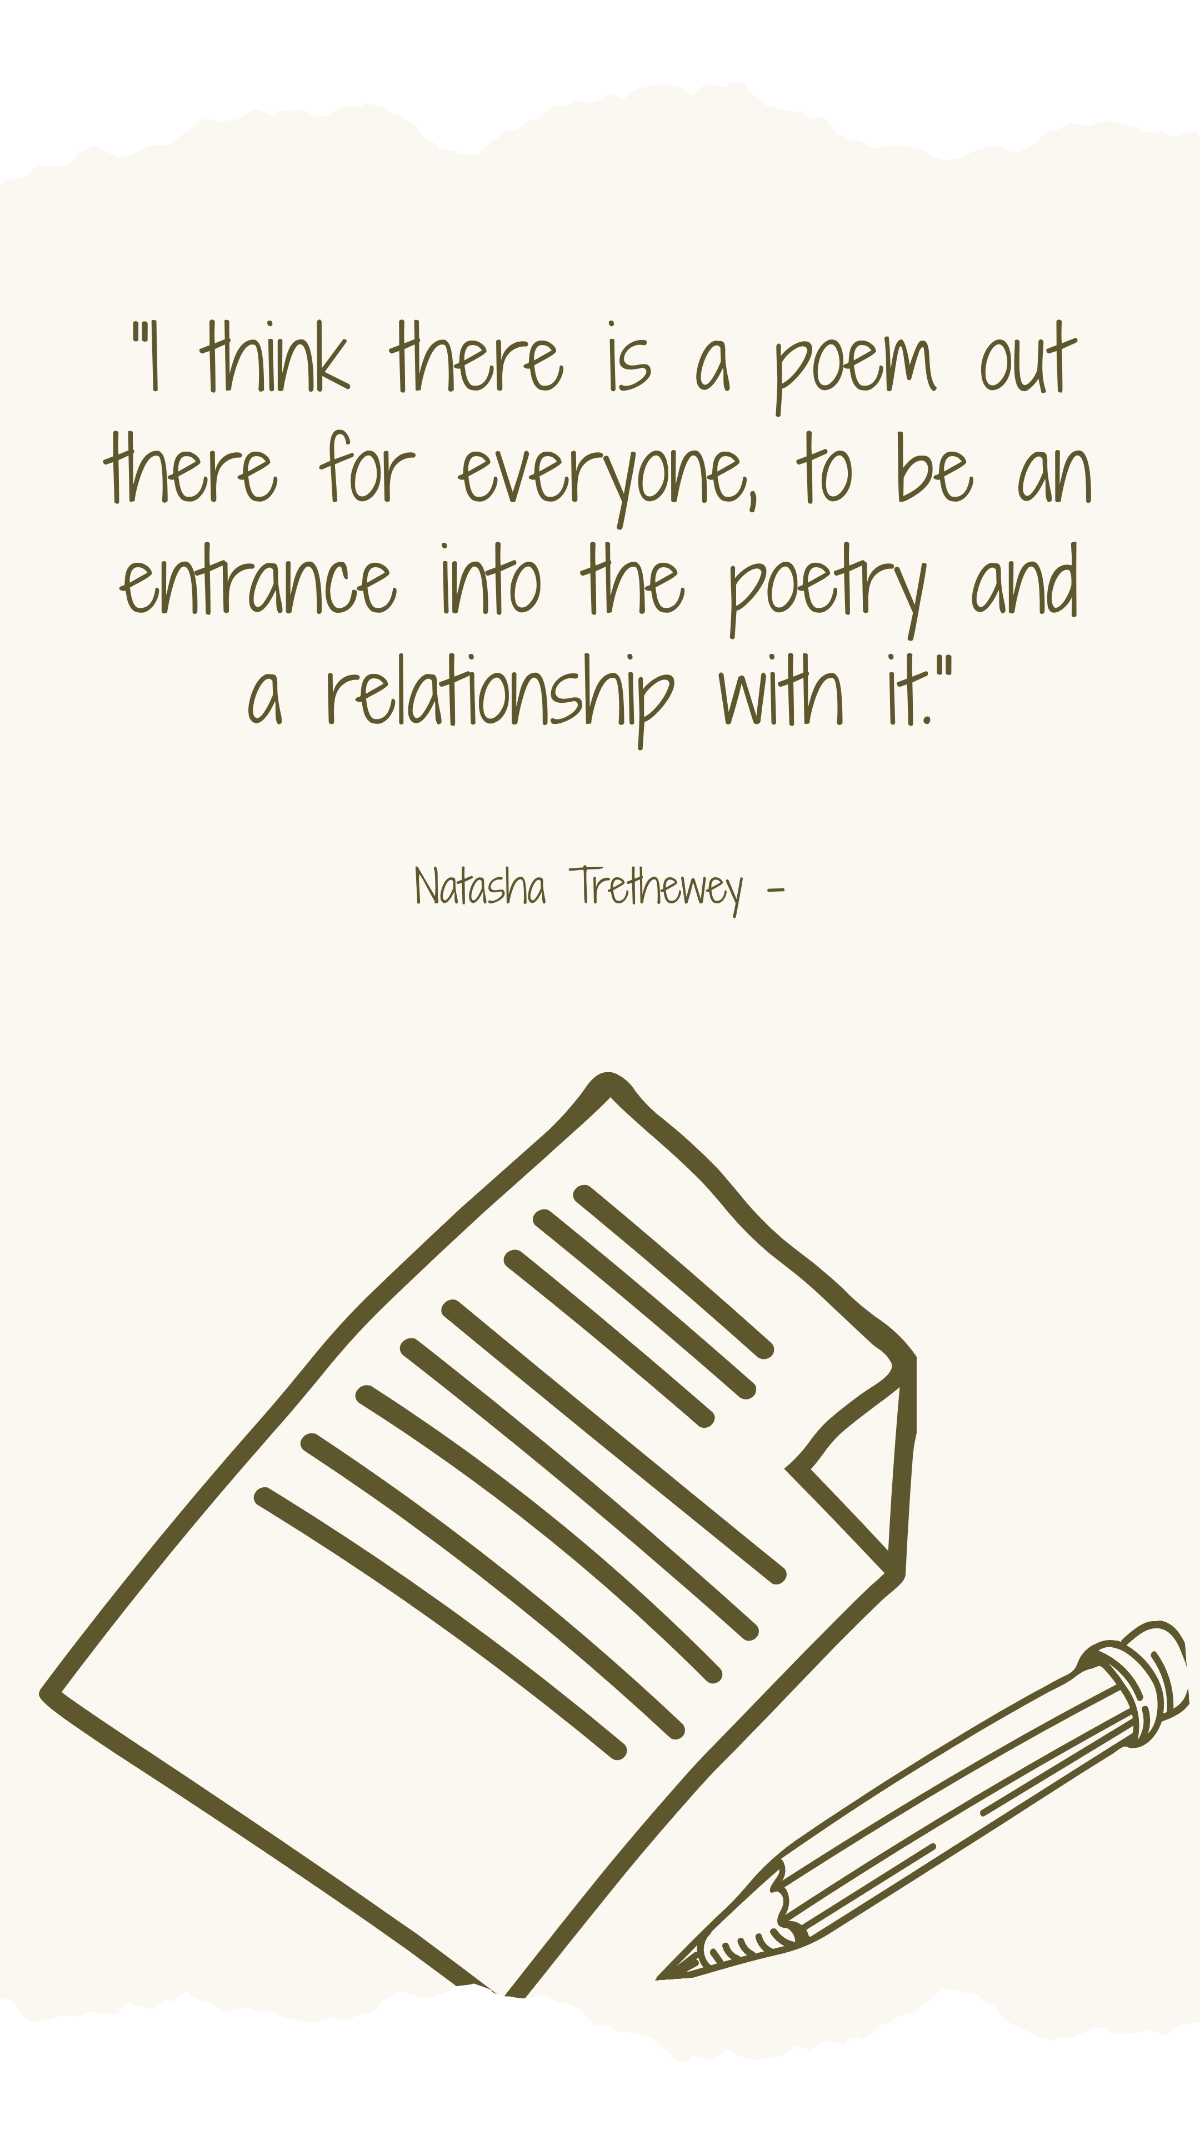 Natasha Trethewey - I think there is a poem out there for everyone, to be an entrance into the poetry and a relationship with it. Template